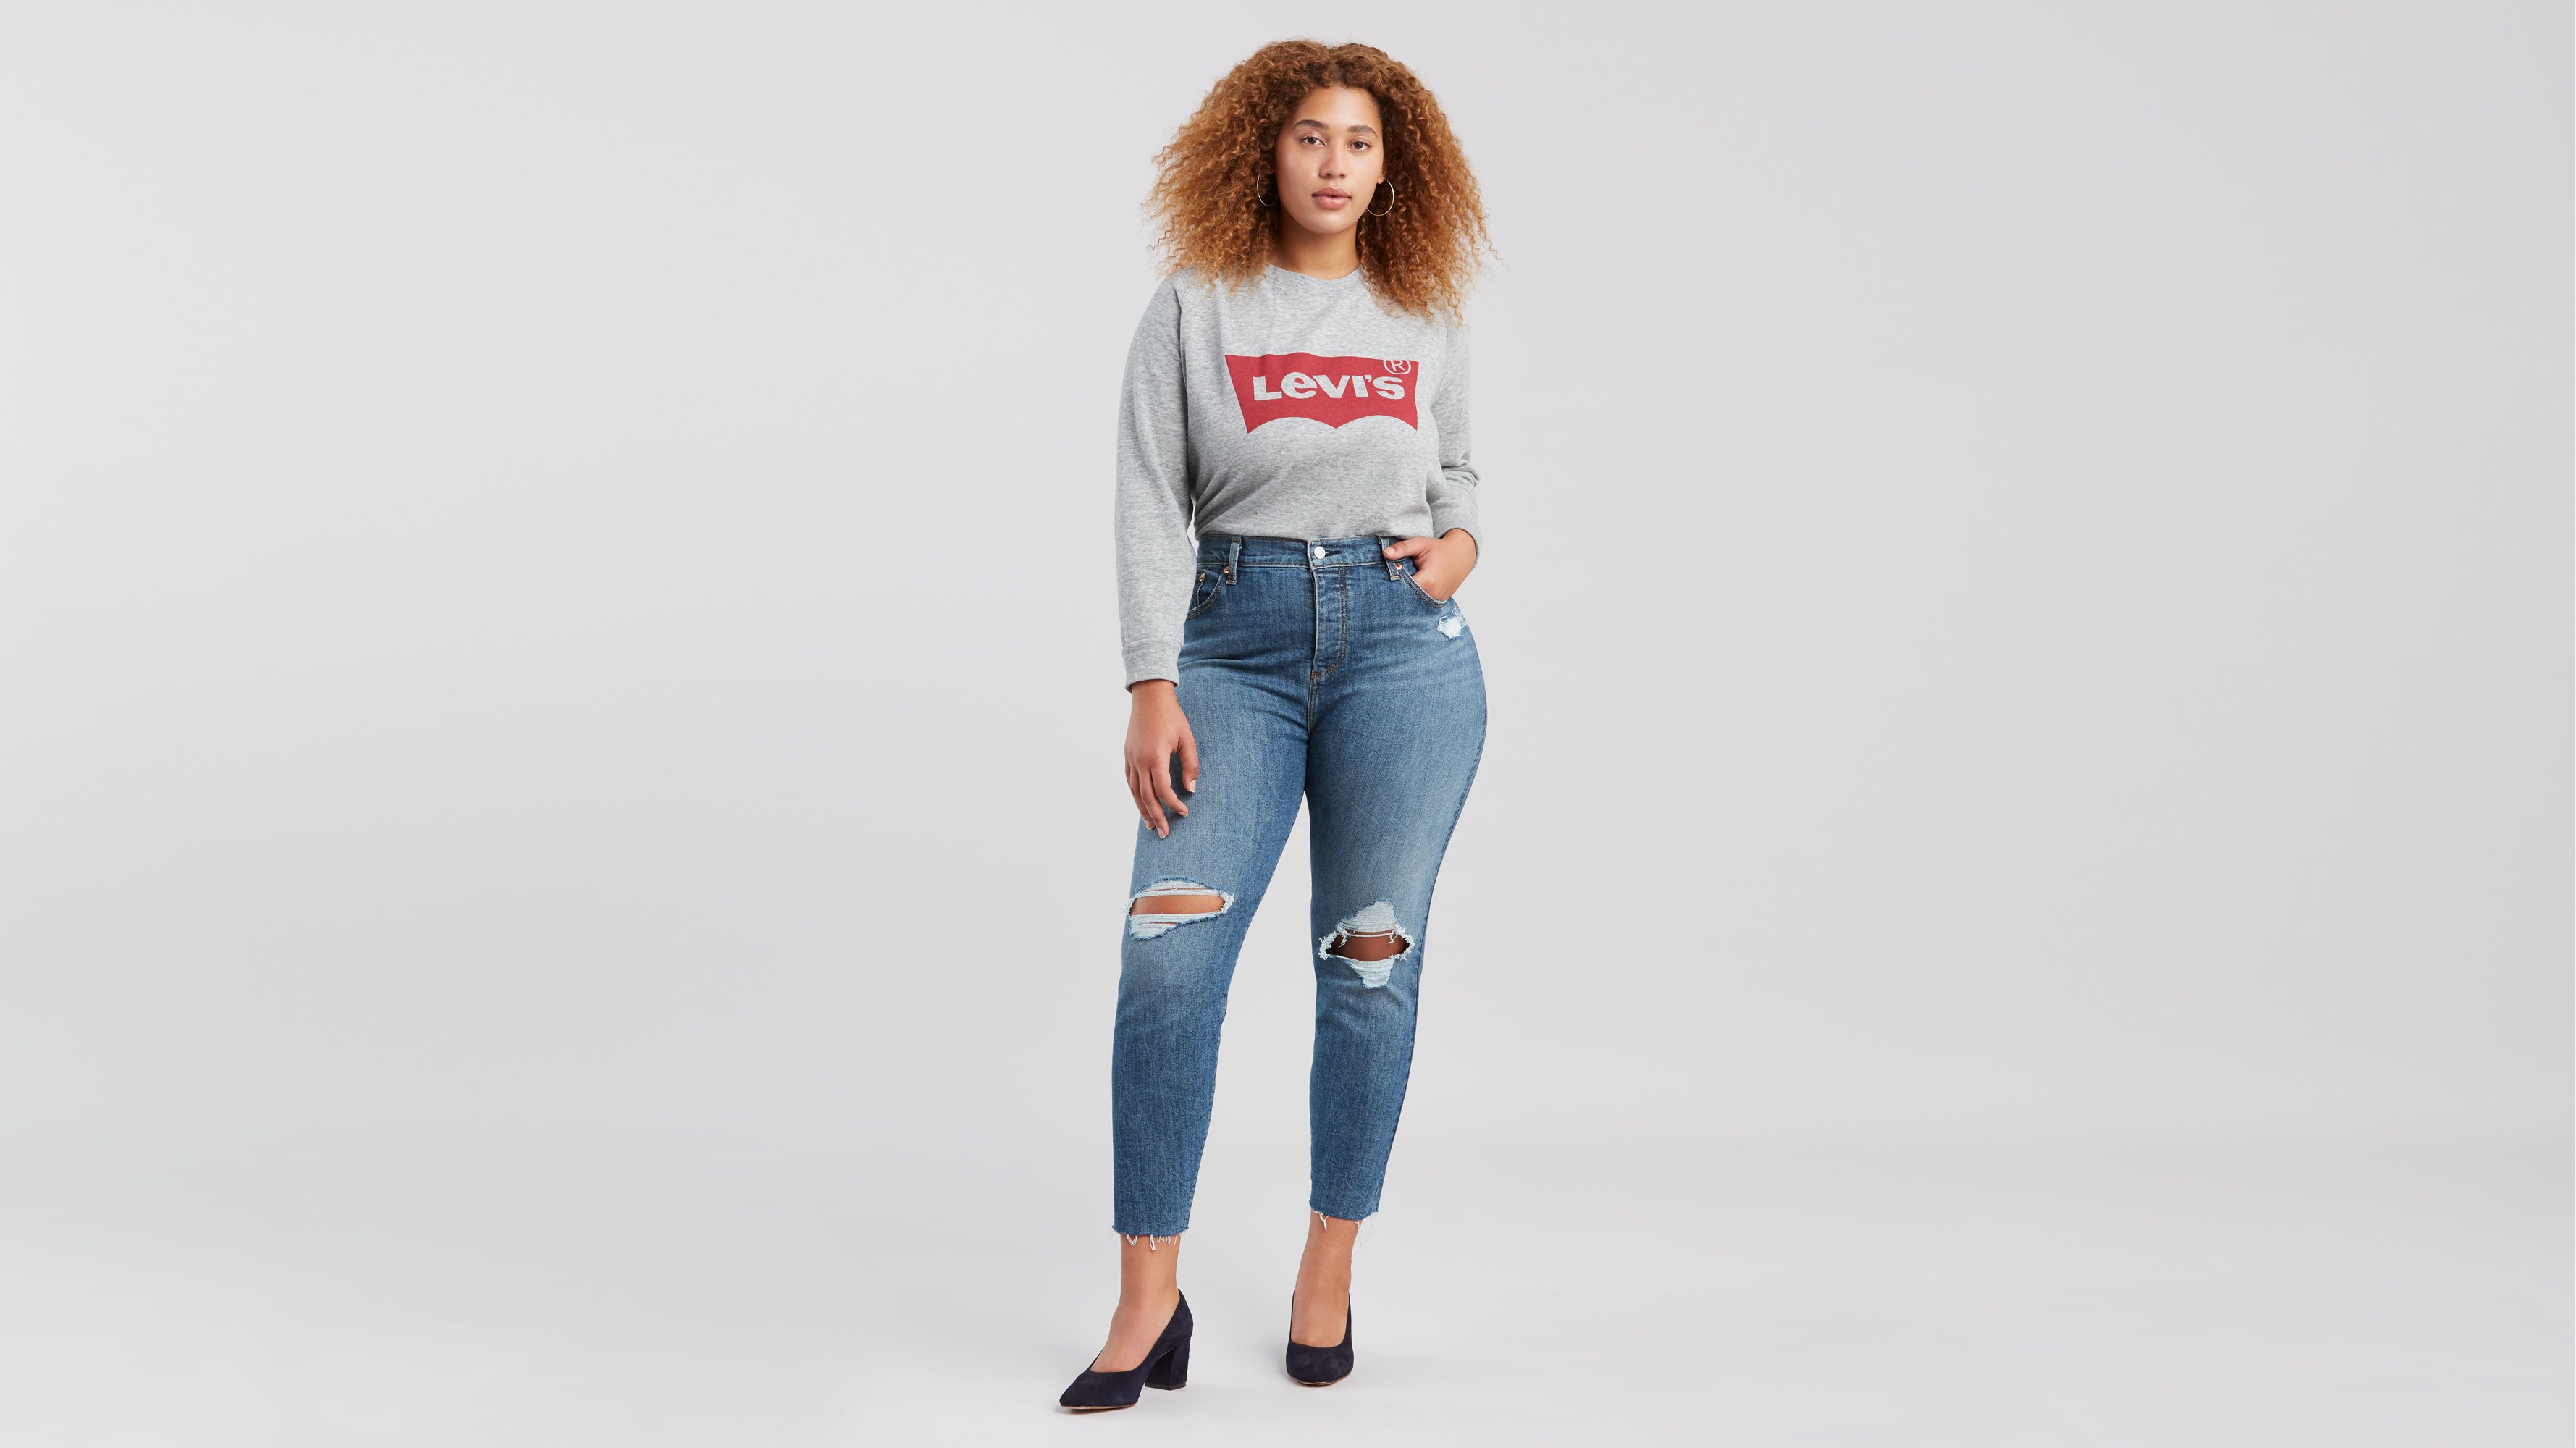 levis high waisted jeans plus size 